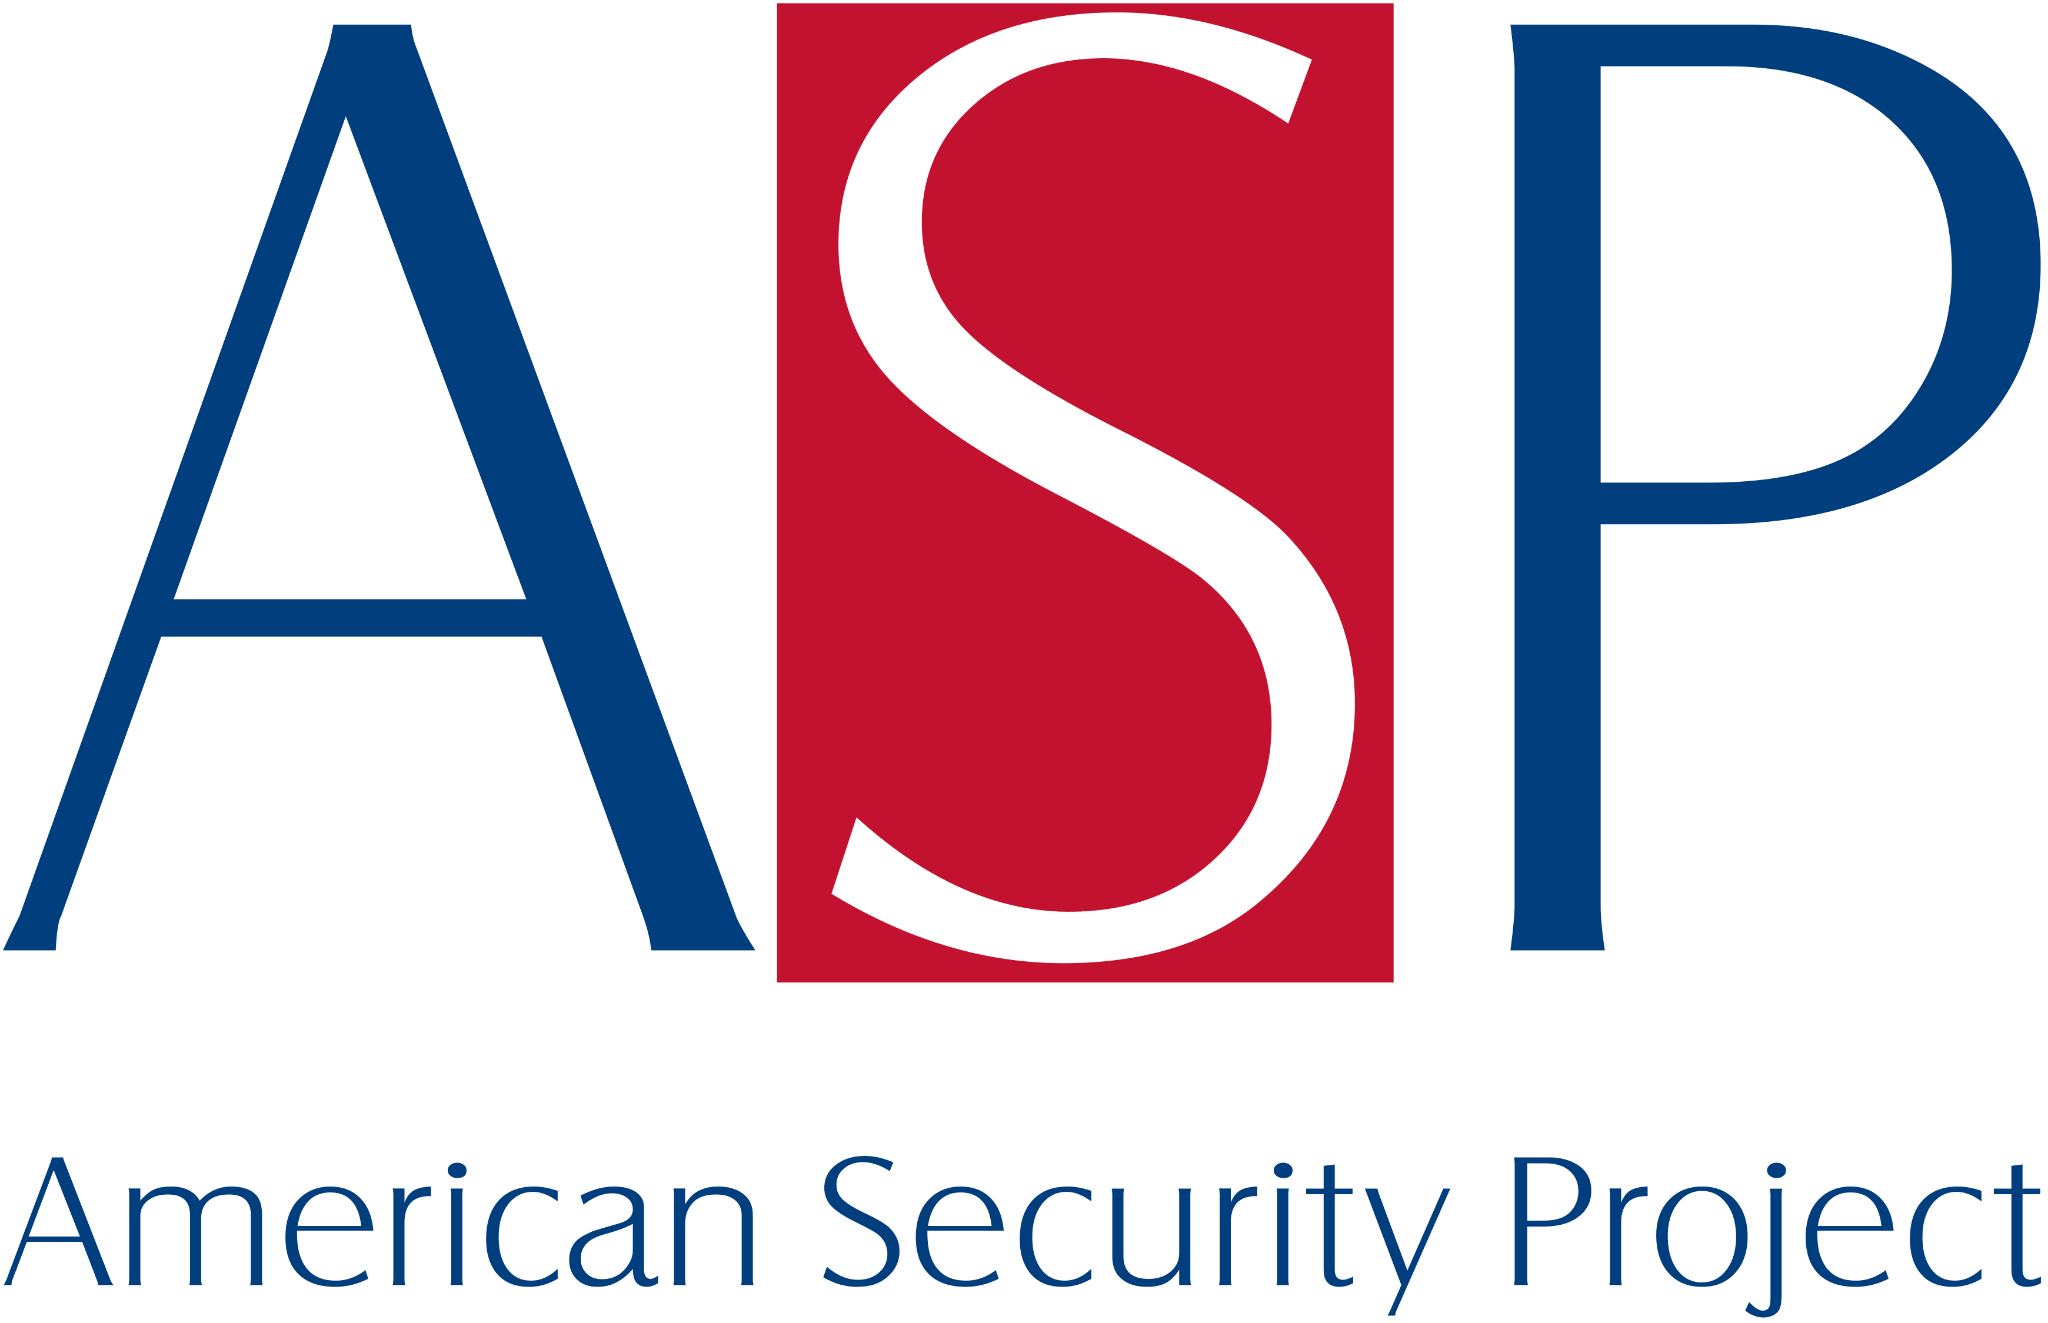 Press Release: ASP Calls for U.S. Leadership on Exponential Technology